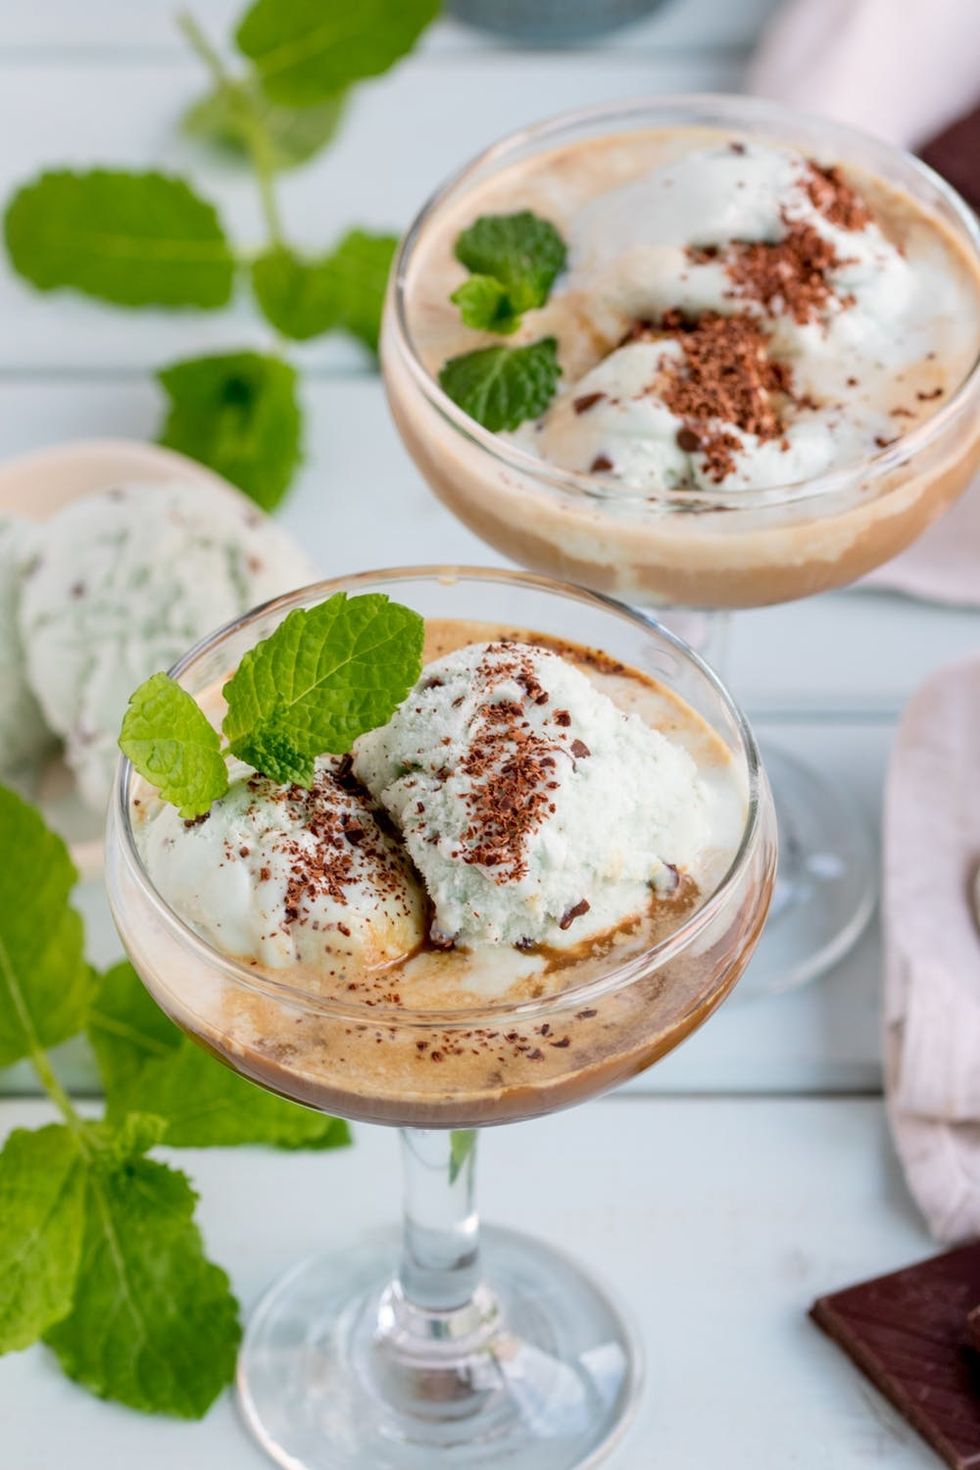 We Just Upgraded Our Affogato Recipe For St Paddy's Day With Boozy Irish Coffee And Mint Choc Chip Ice Cream!